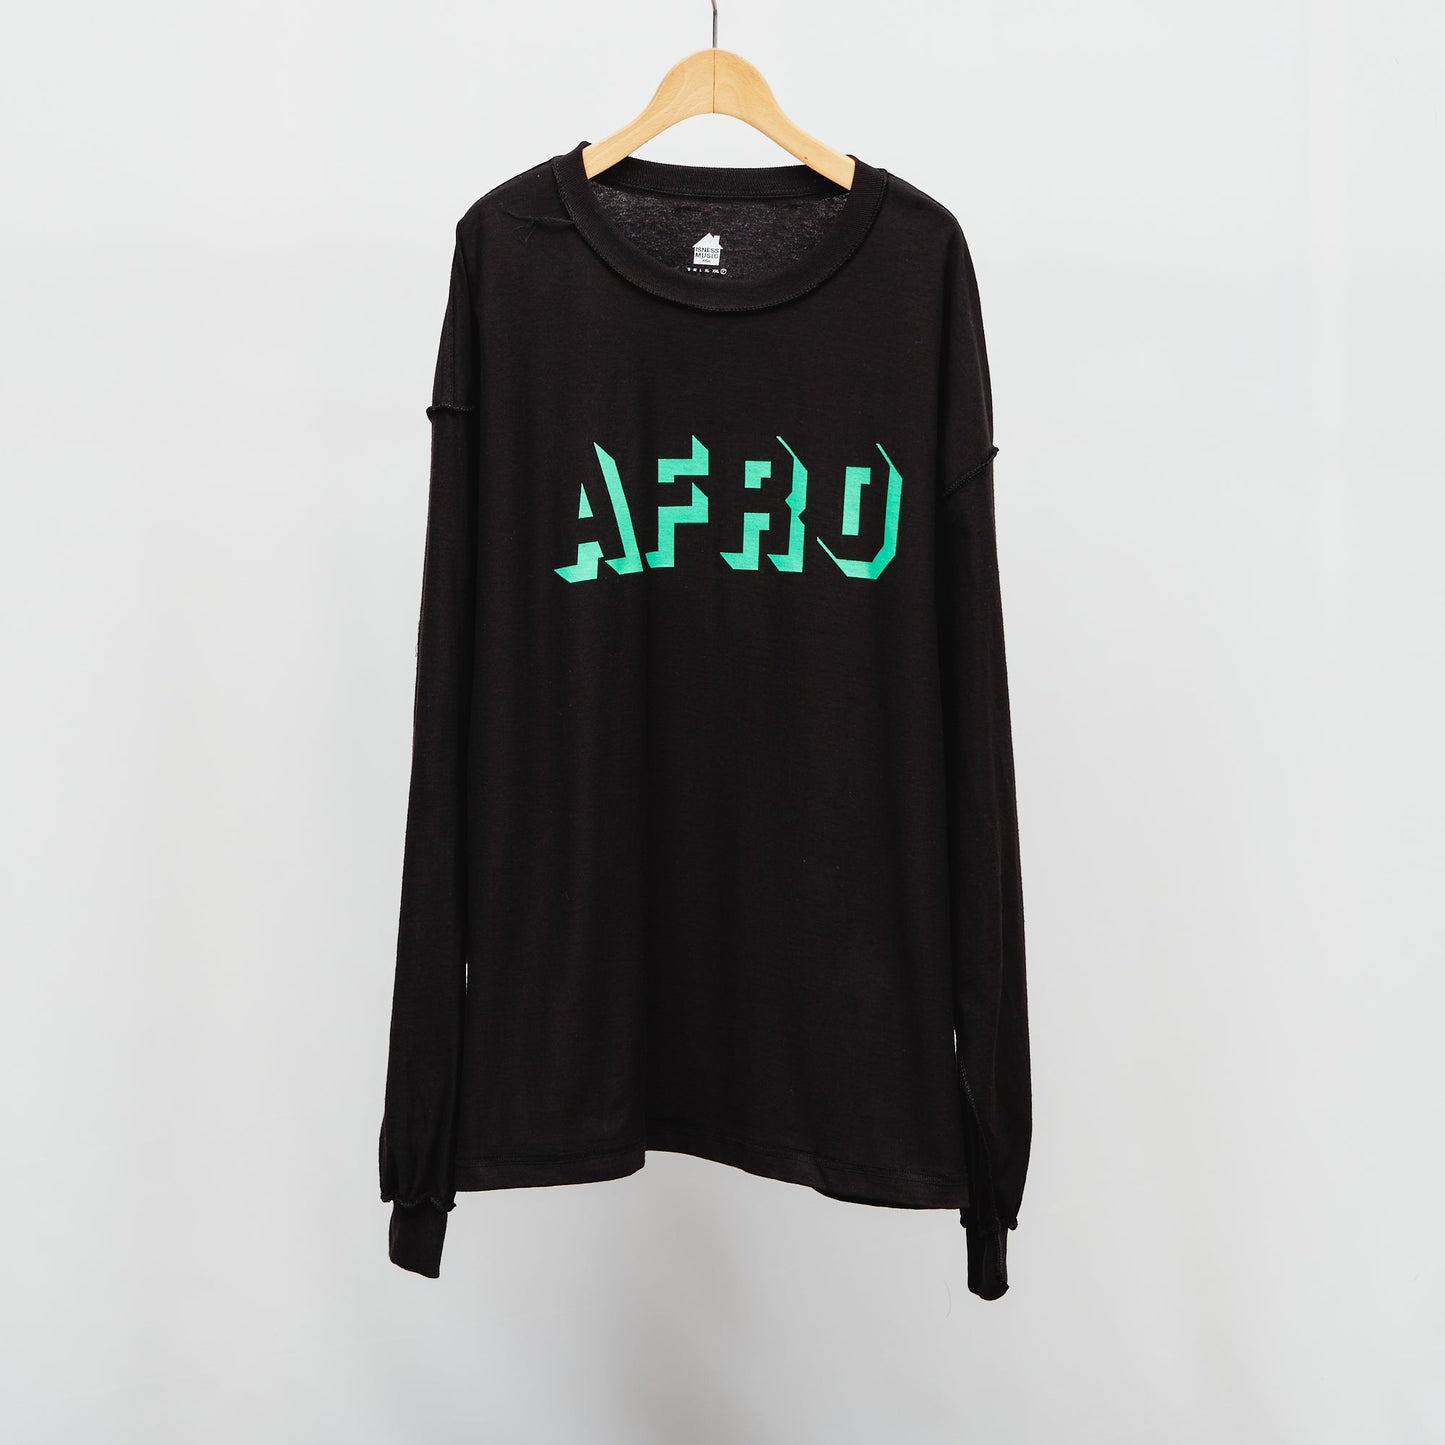  AFRO L/S T-SHIRTS is-ness online shop 2